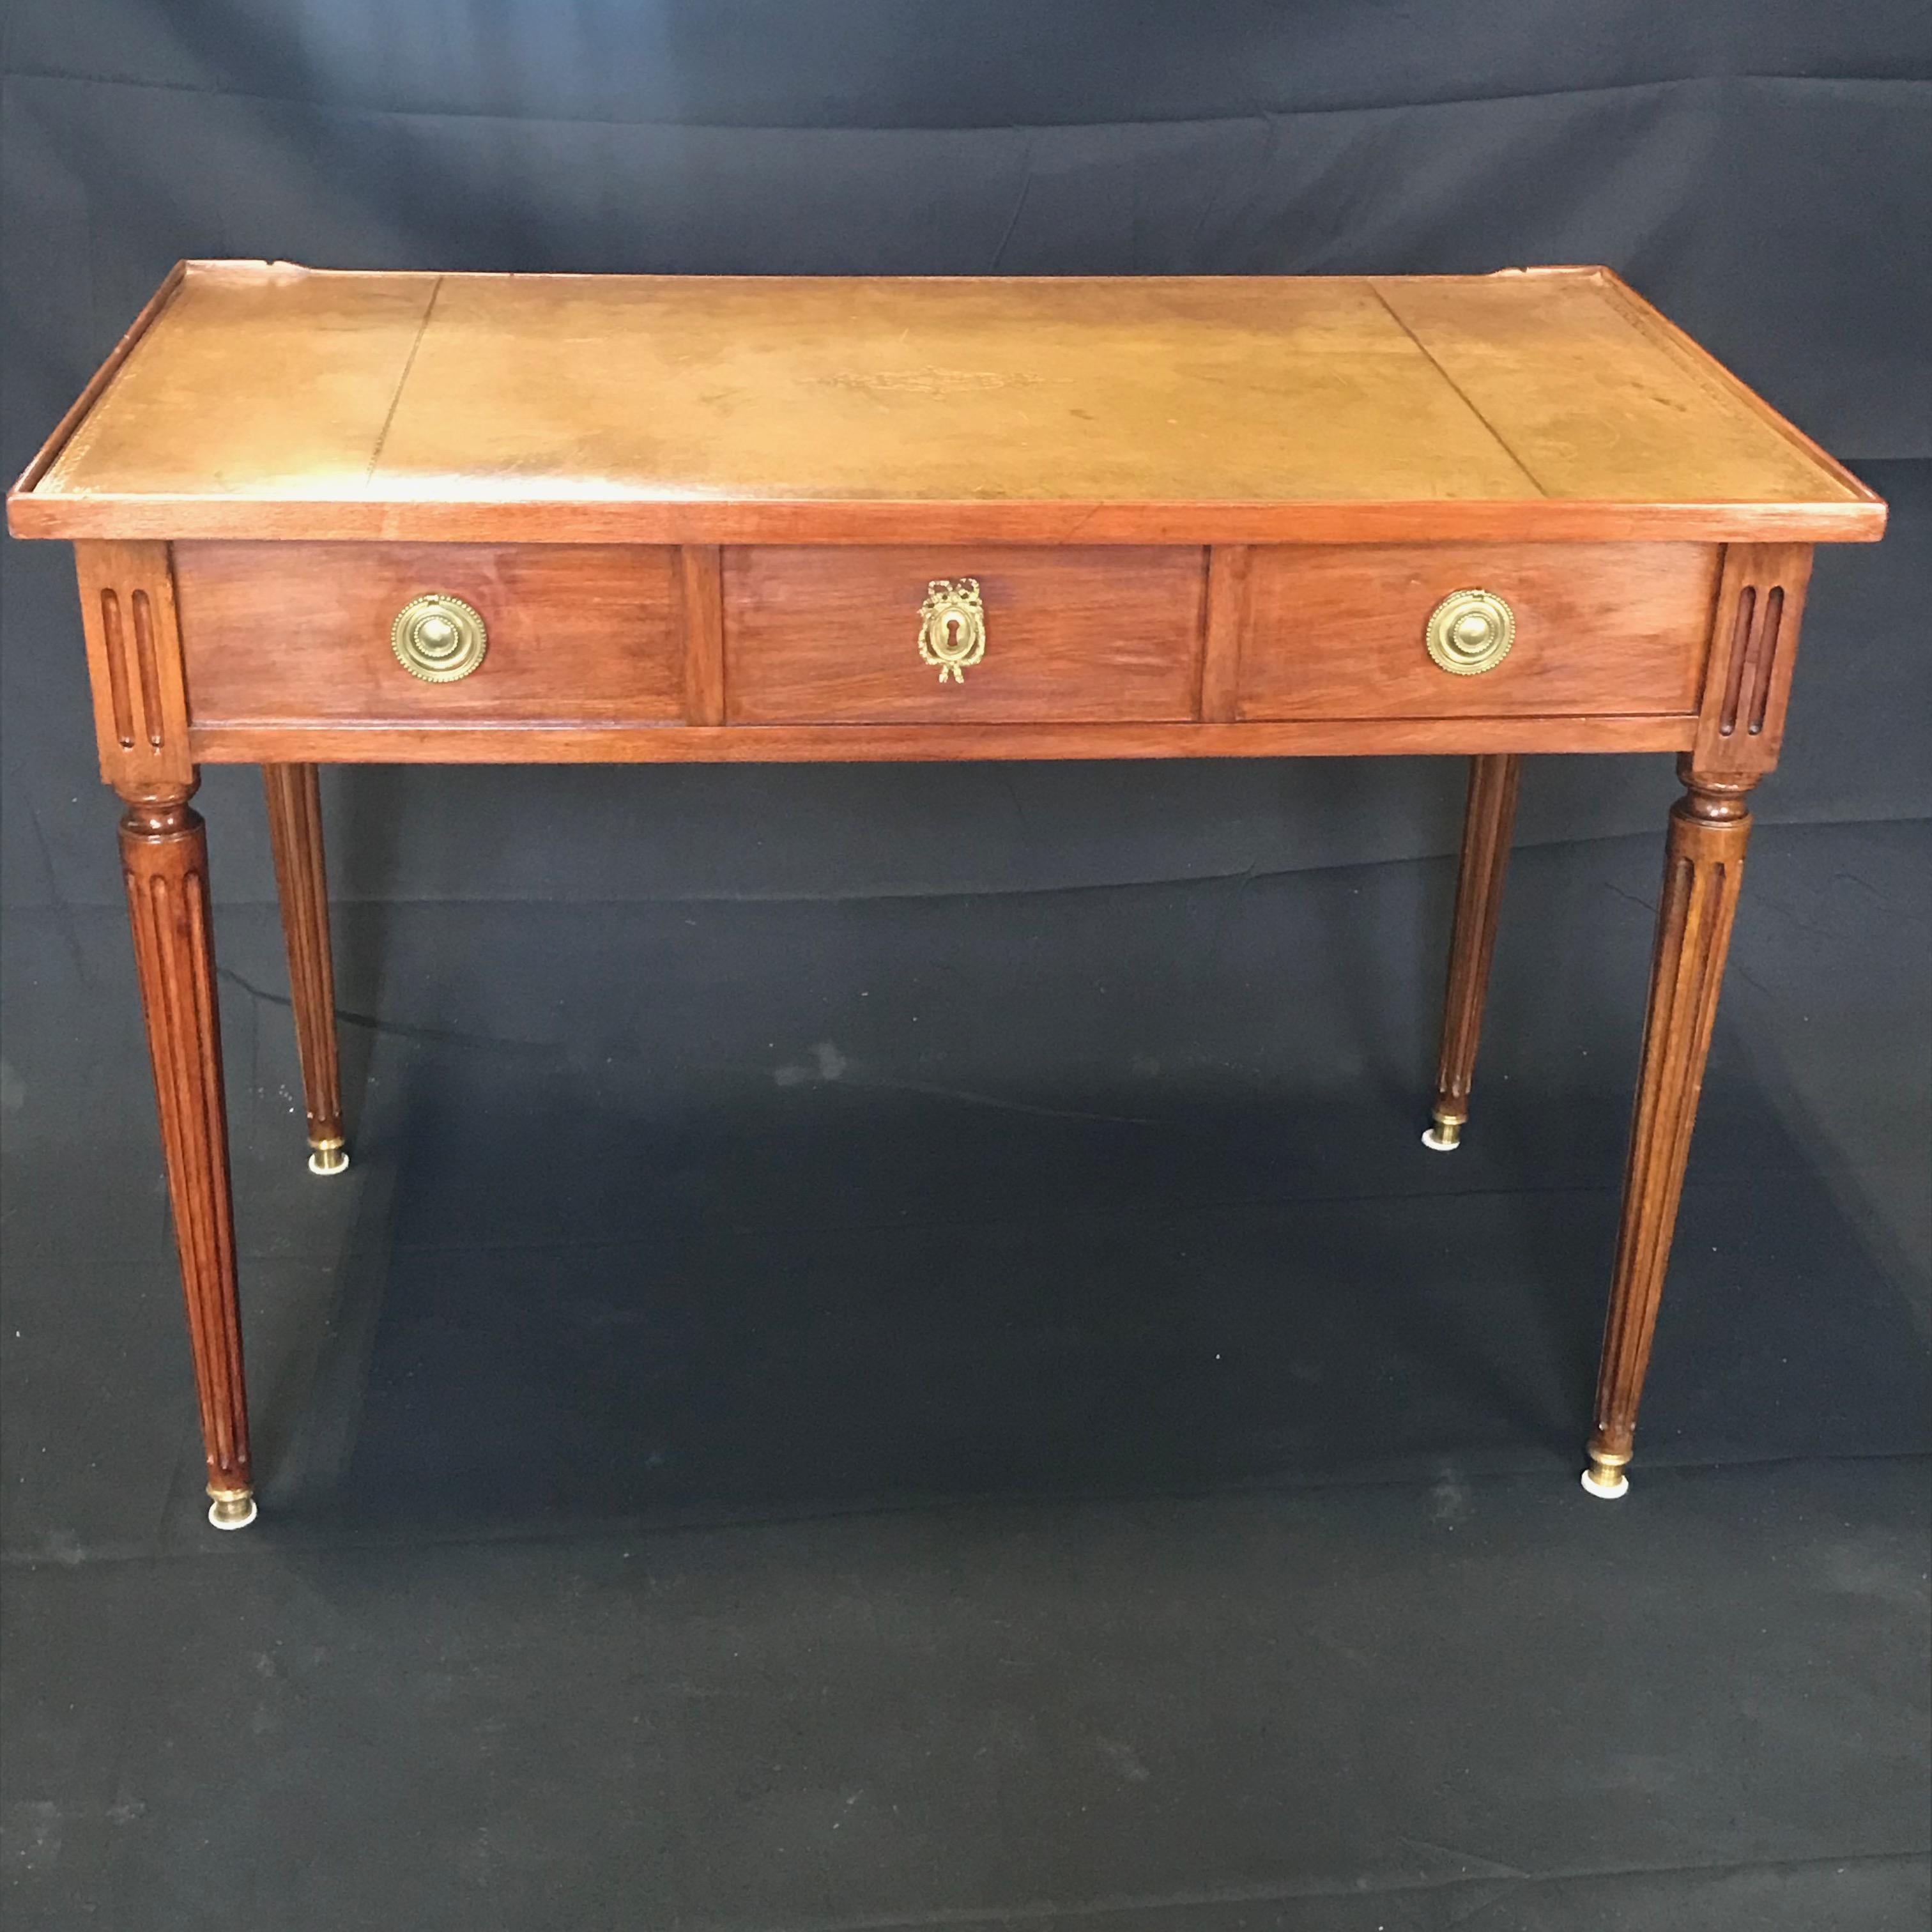 A fine French Louis XVI two sided mahogany lady's writing table or desk on reeded tapered legs with 3 drawers and pretty brass hardware. Tooled leather top is a caramel color with gold leaf. The back side looks the same as the front, but drawers are